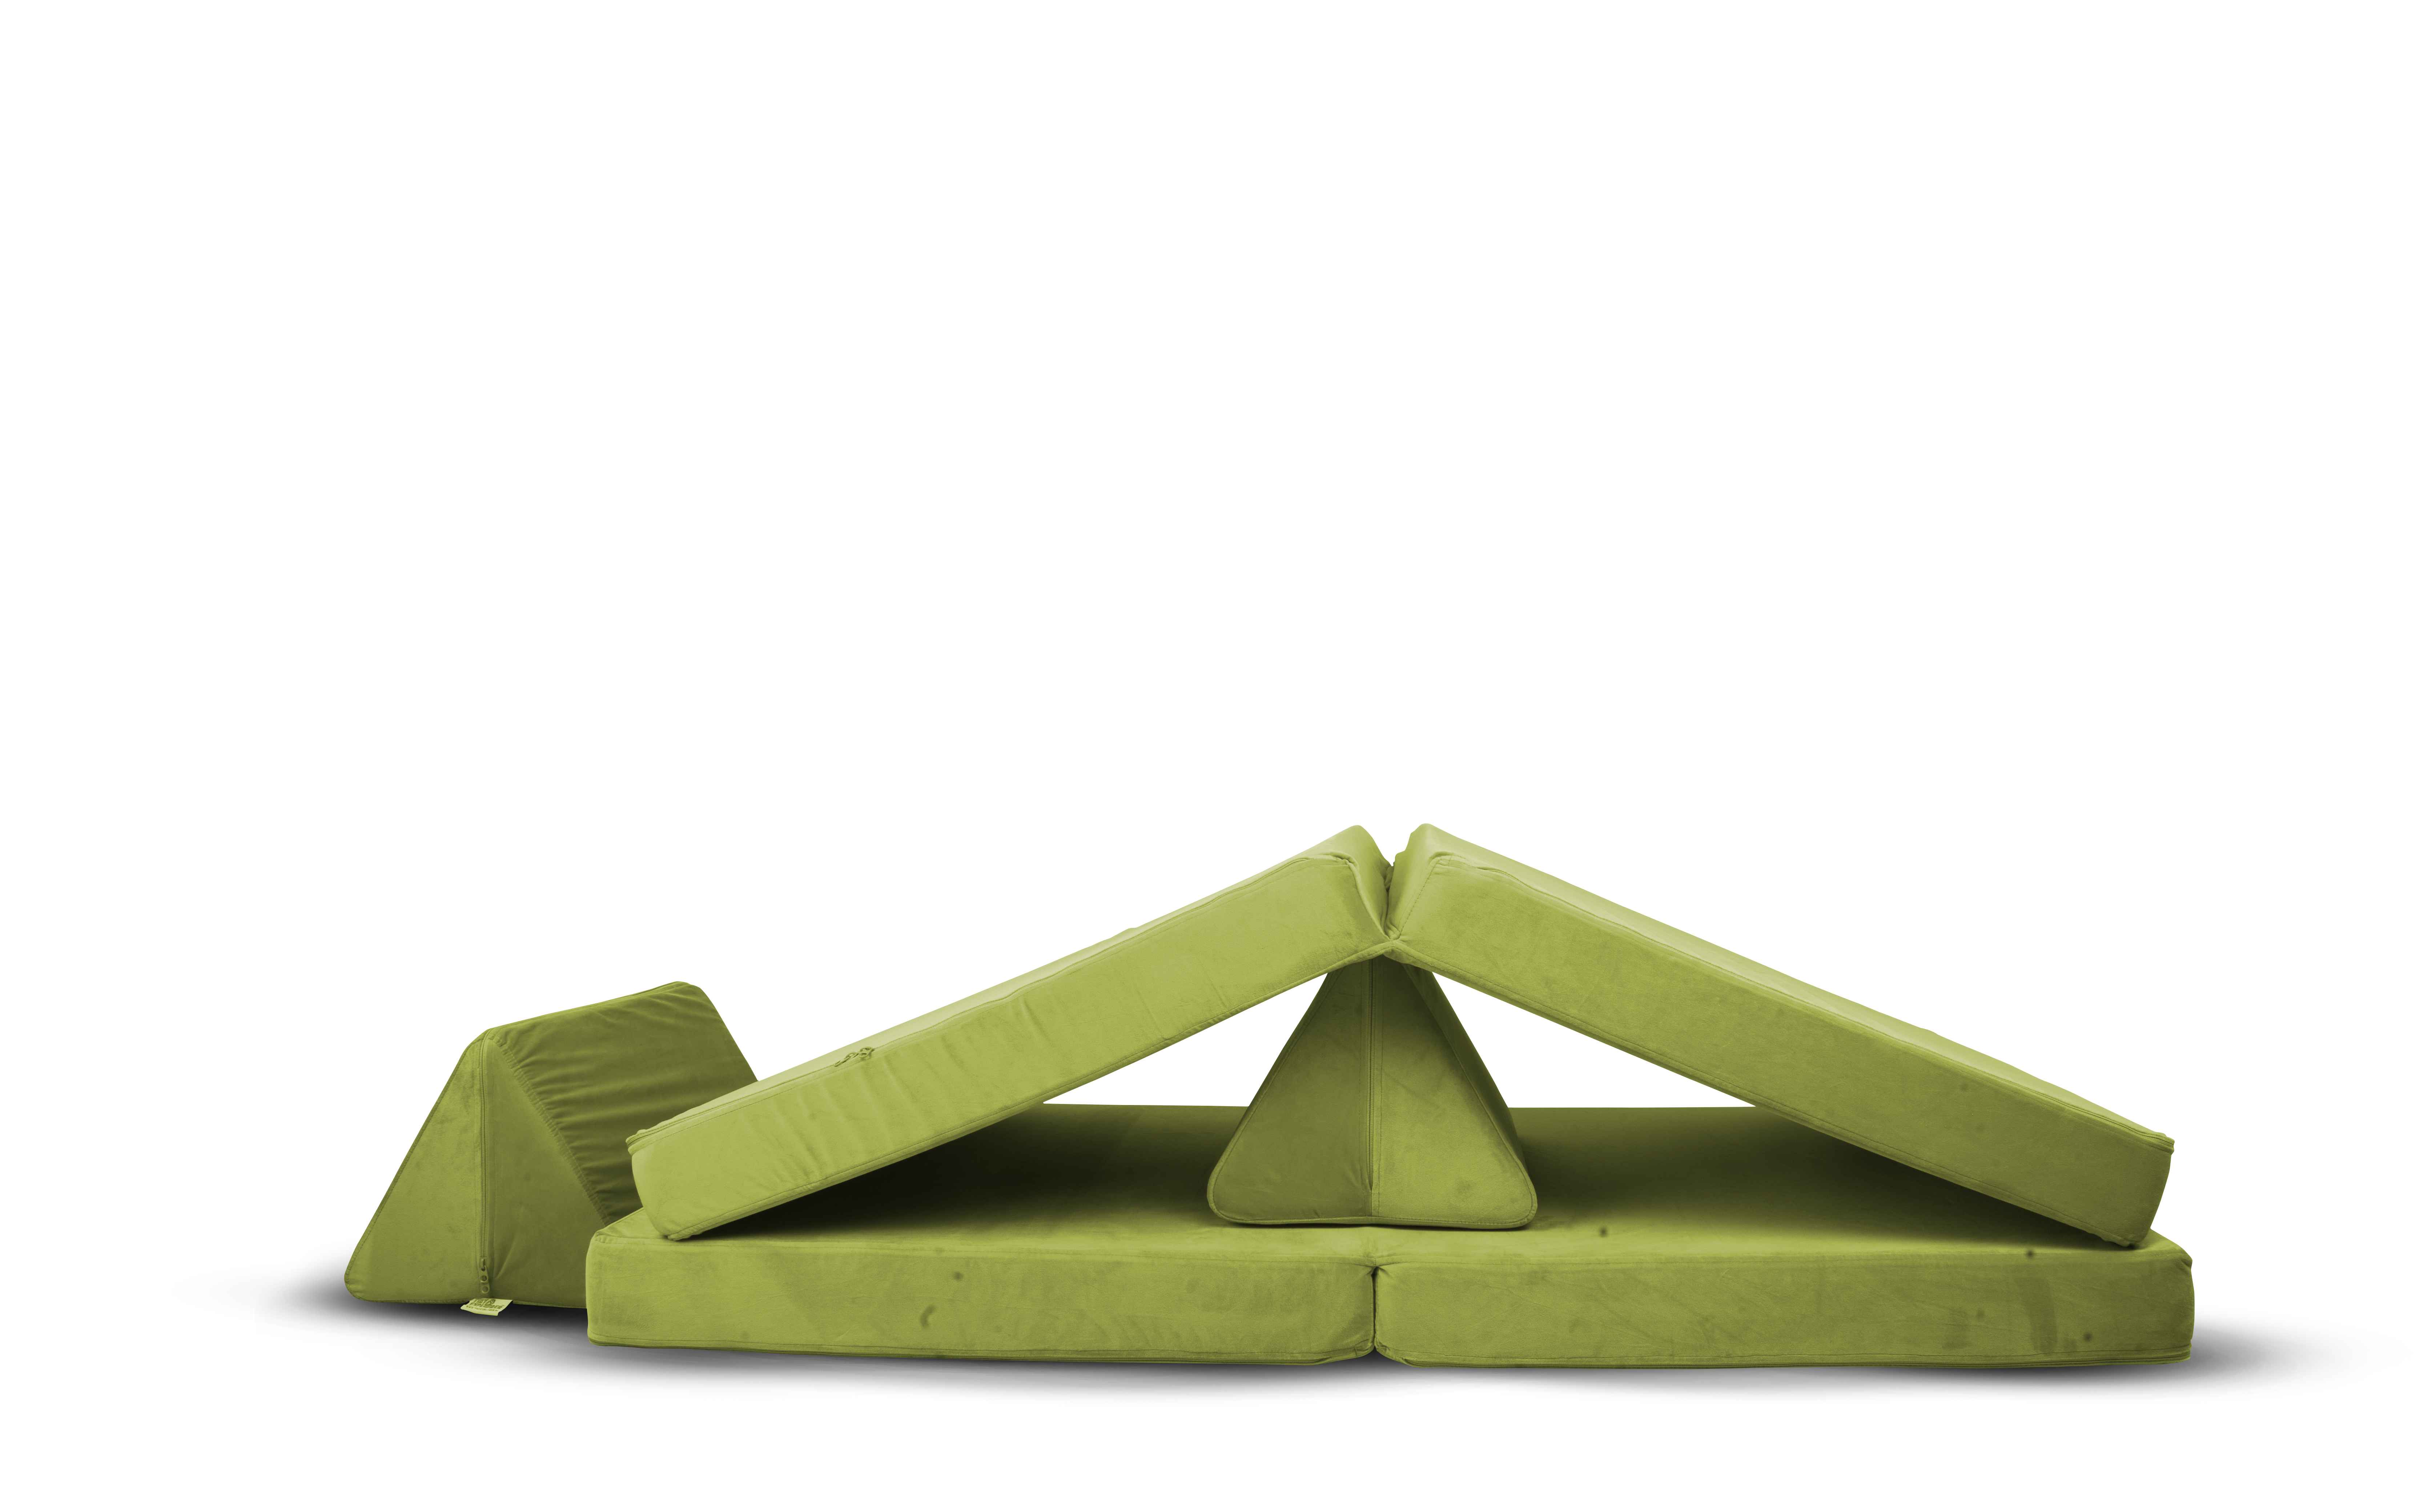 Cosmos Play Couch - Jungle Green